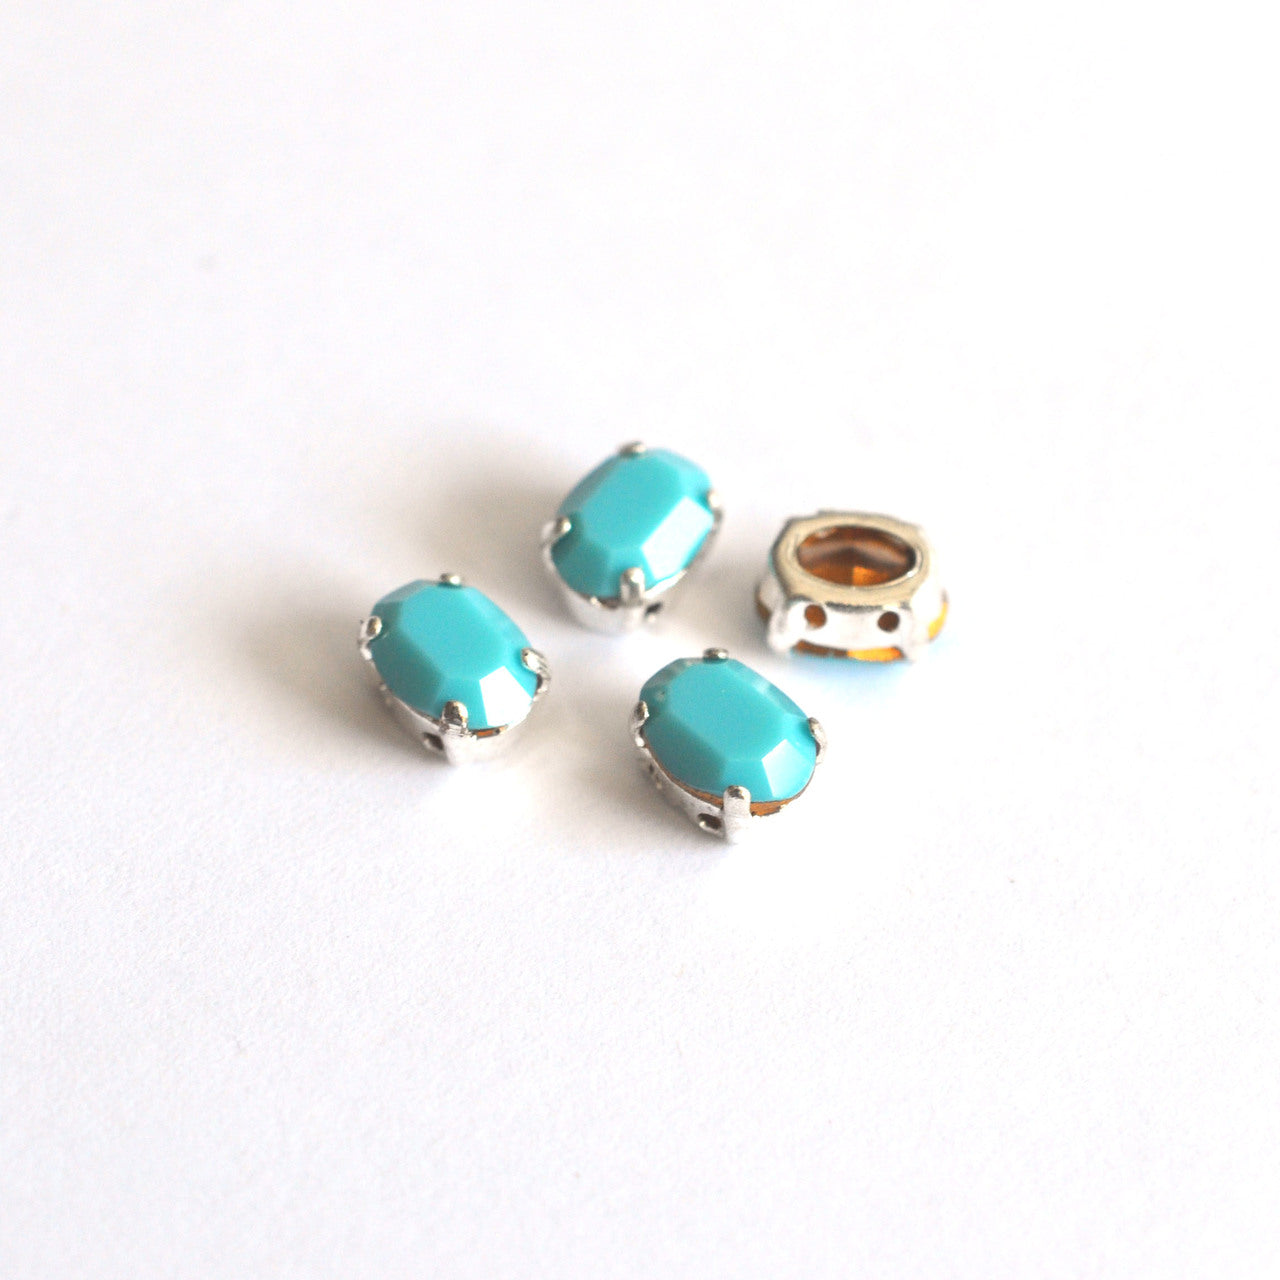 Turquoise 8x6mm Sew On Set Ovals - 4 Pieces